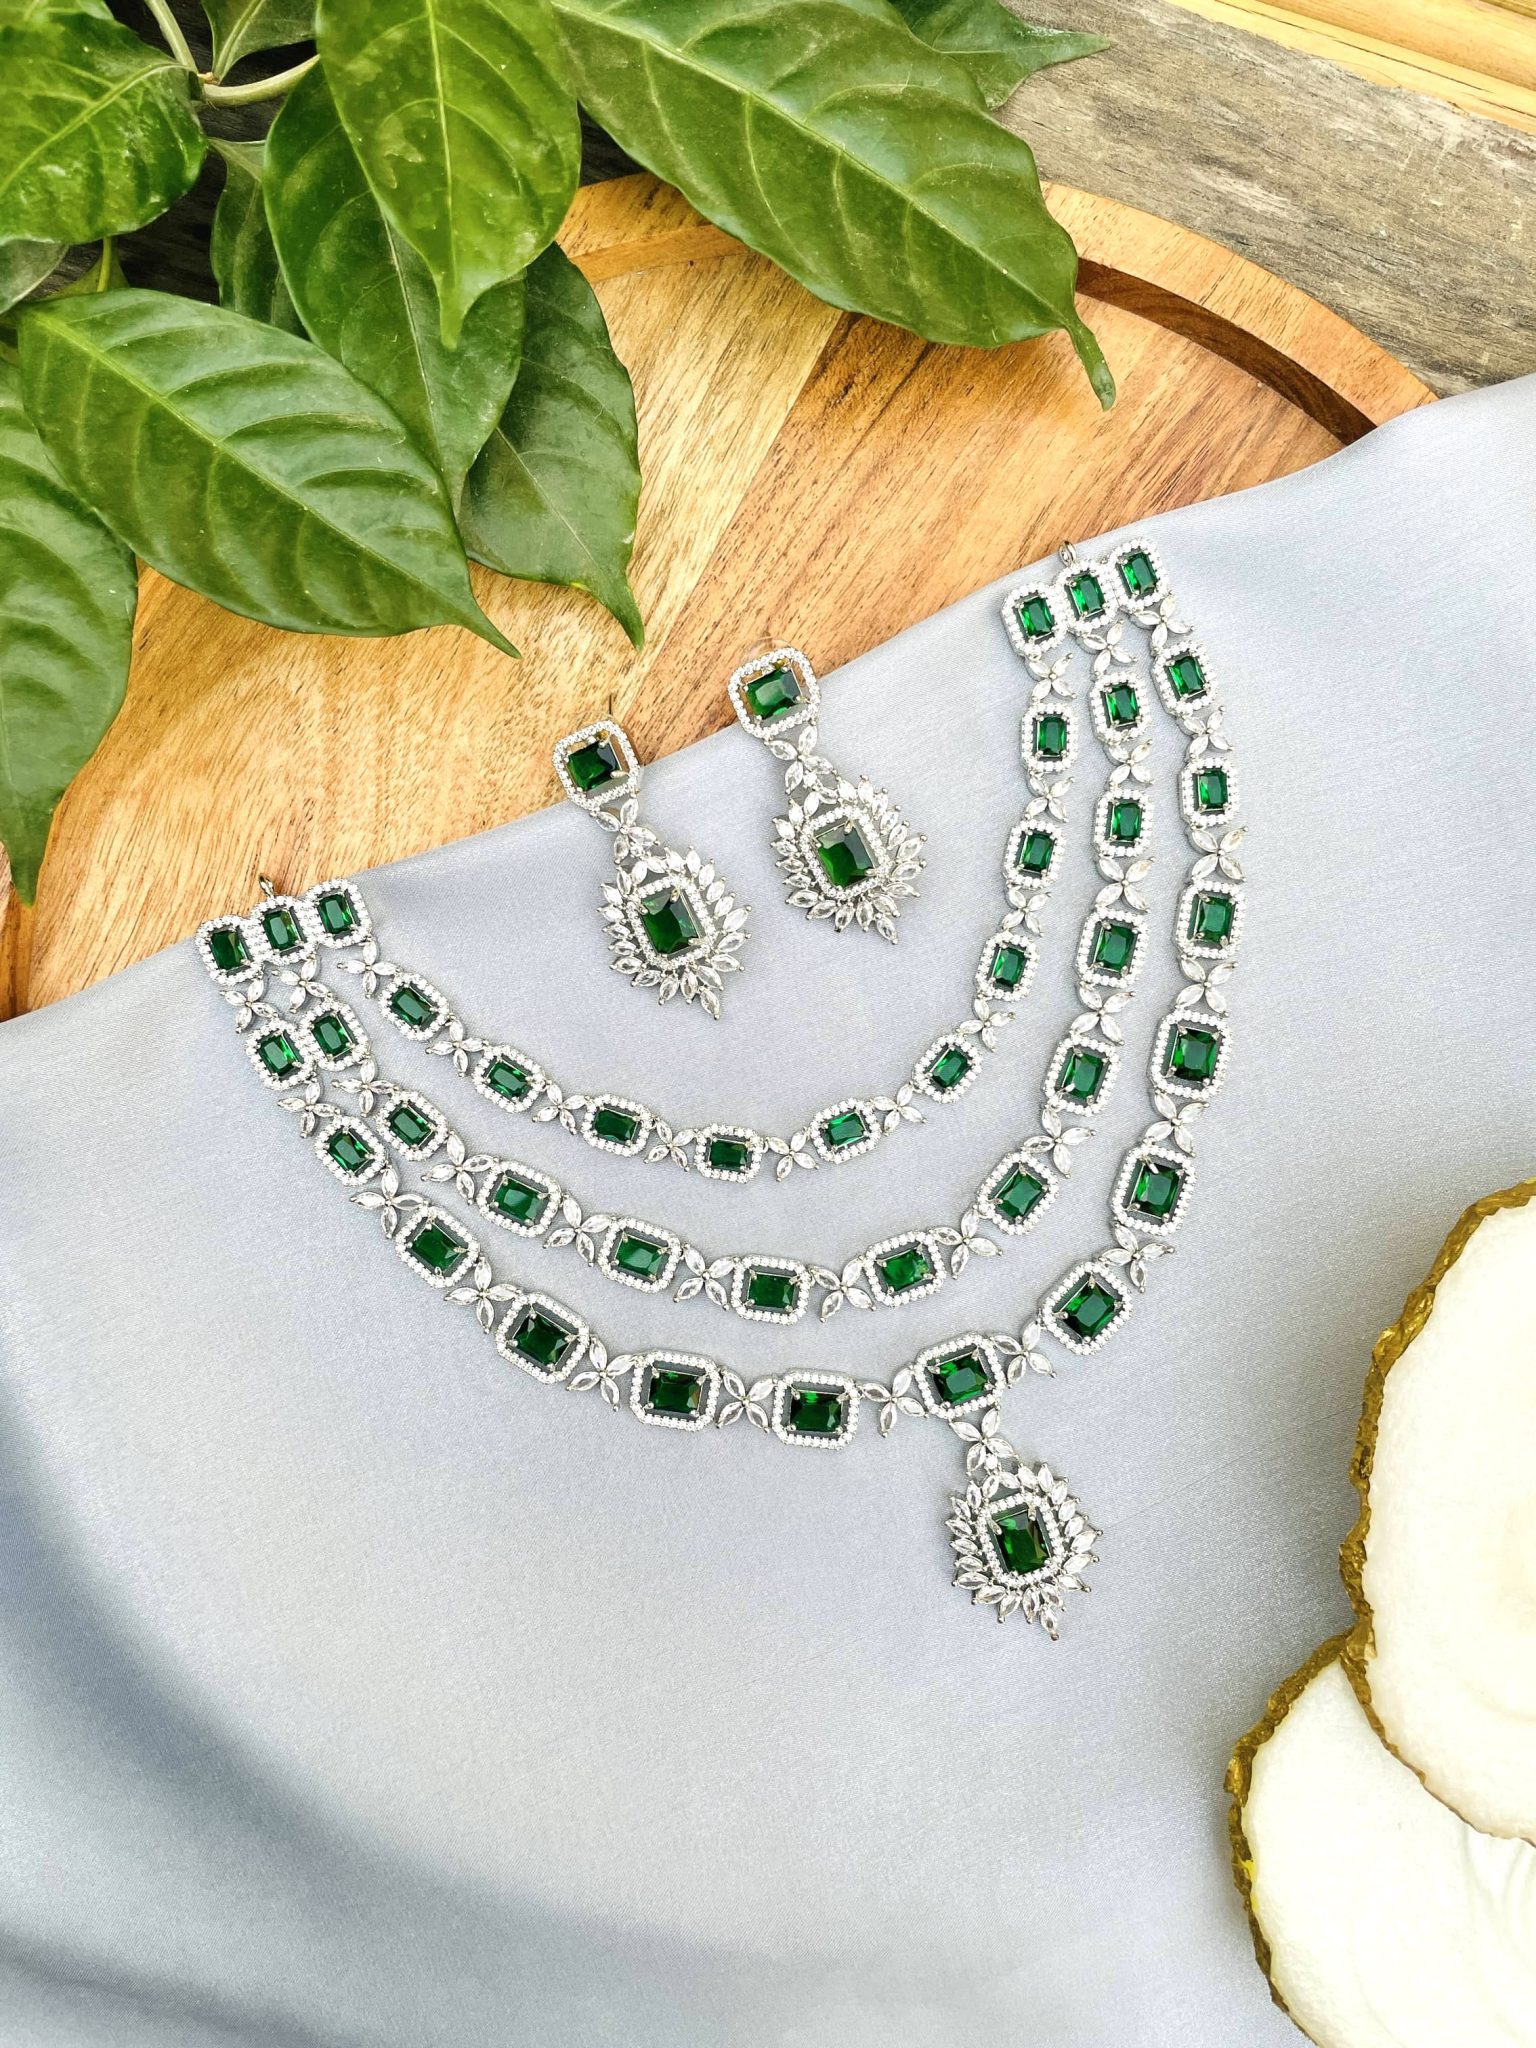 Aggregate more than 150 green layered necklace